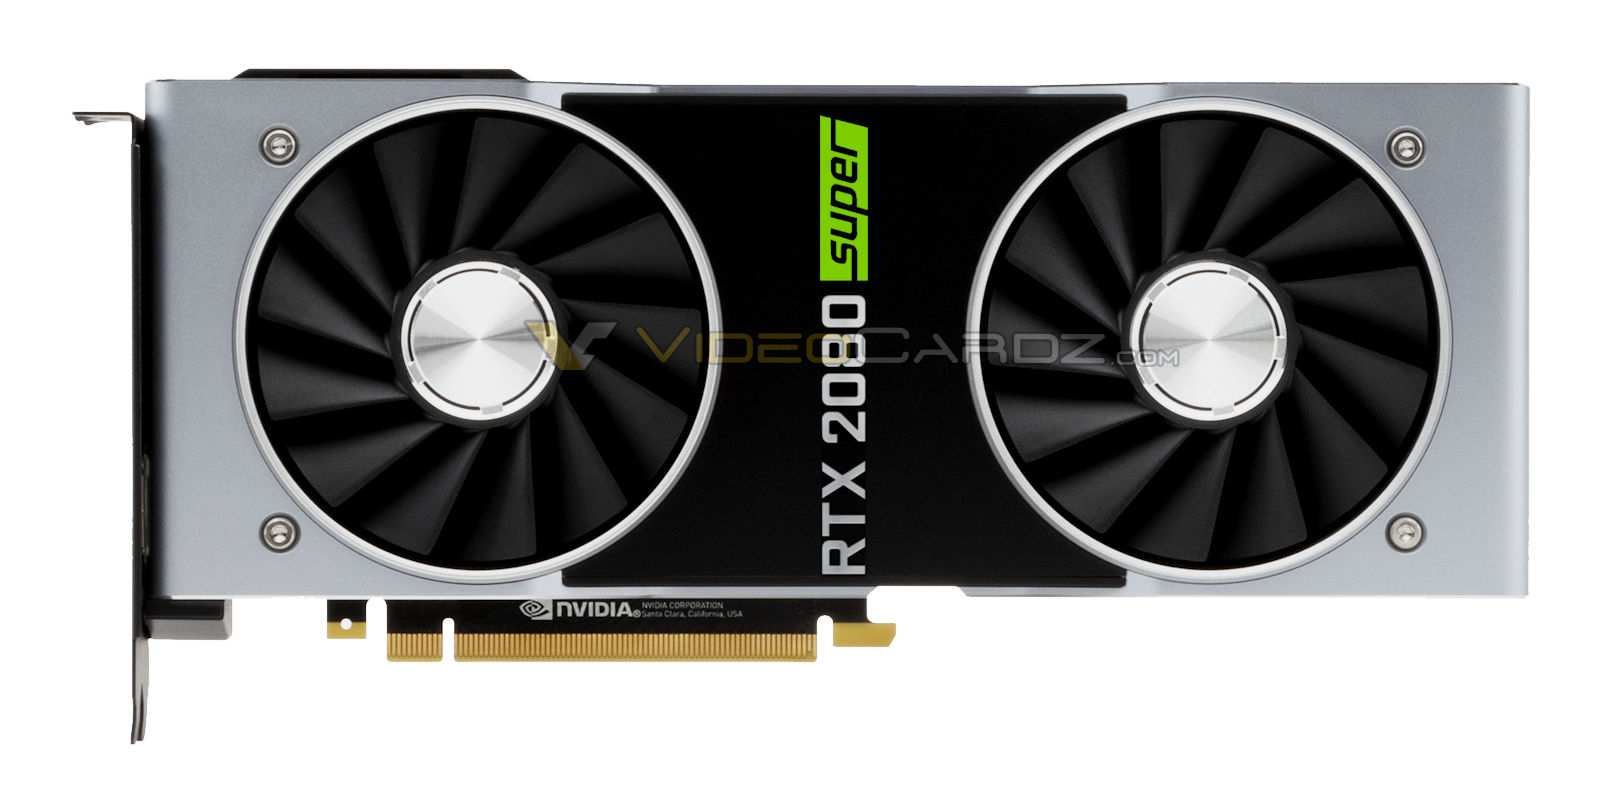 NVIDIA RTX 20 lineup confirmed for July 2 launch but with - NotebookCheck.net News